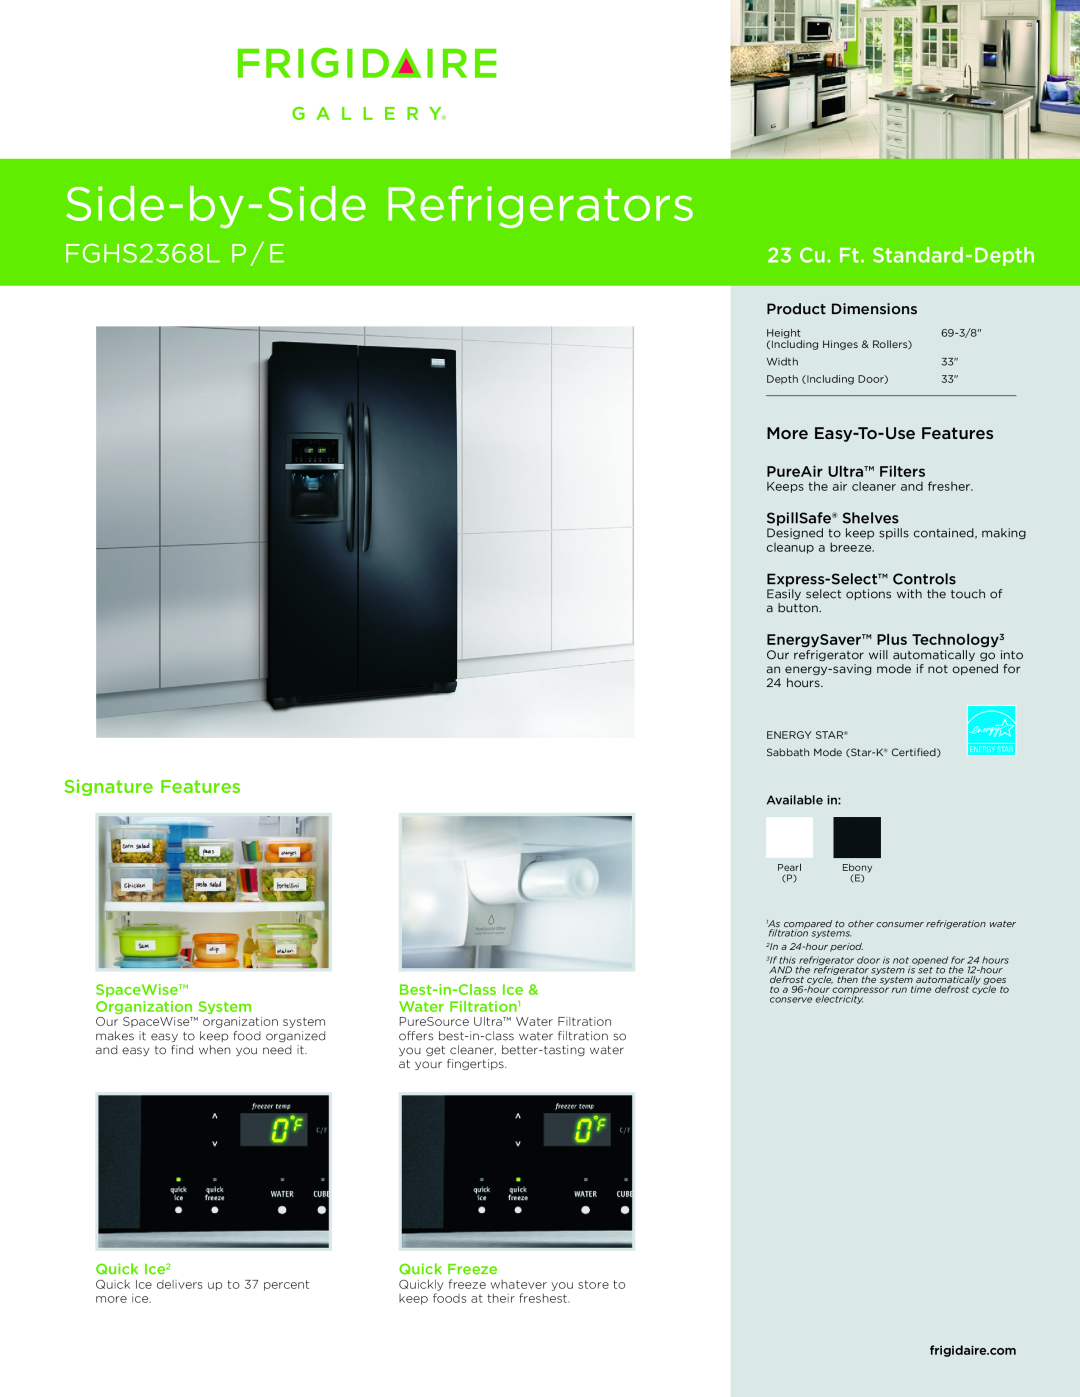 Frigidaire dimensions Side-by-SideRefrigerators, FGHS2368L P / E, 23 Cu. Ft. Standard-Depth, Signature Features 